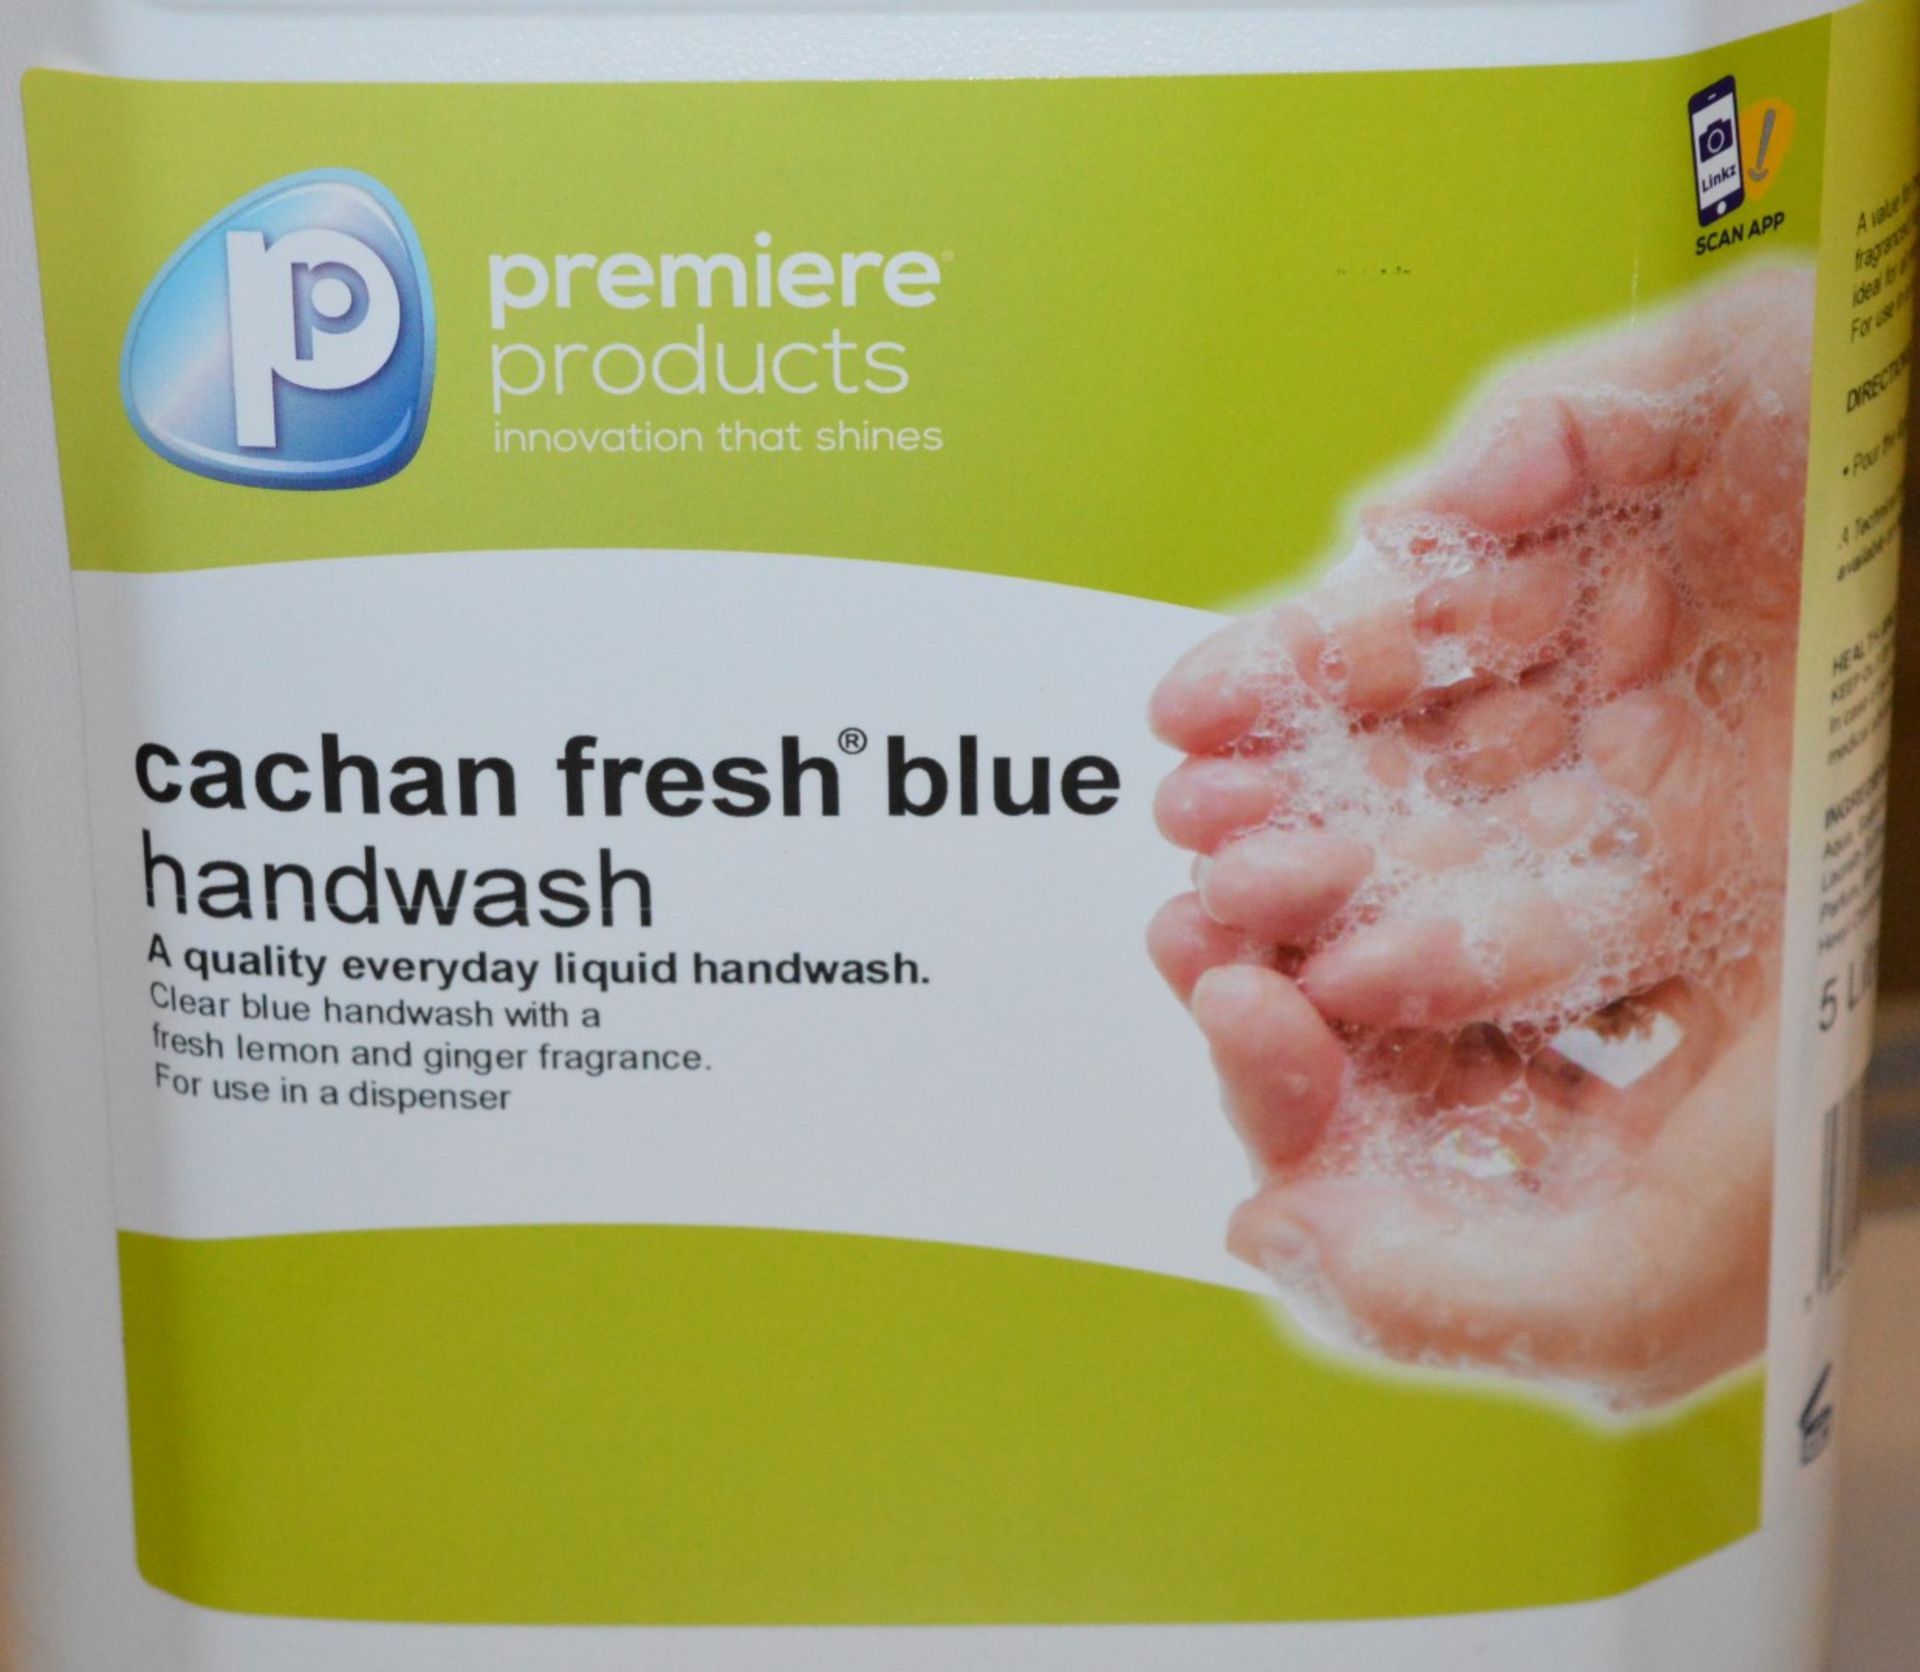 50 x Cachan Fresh 5 Litre Everyday Hand Wash - Premiere Products - Qulaity Everyday Hand Wash - - Image 2 of 2